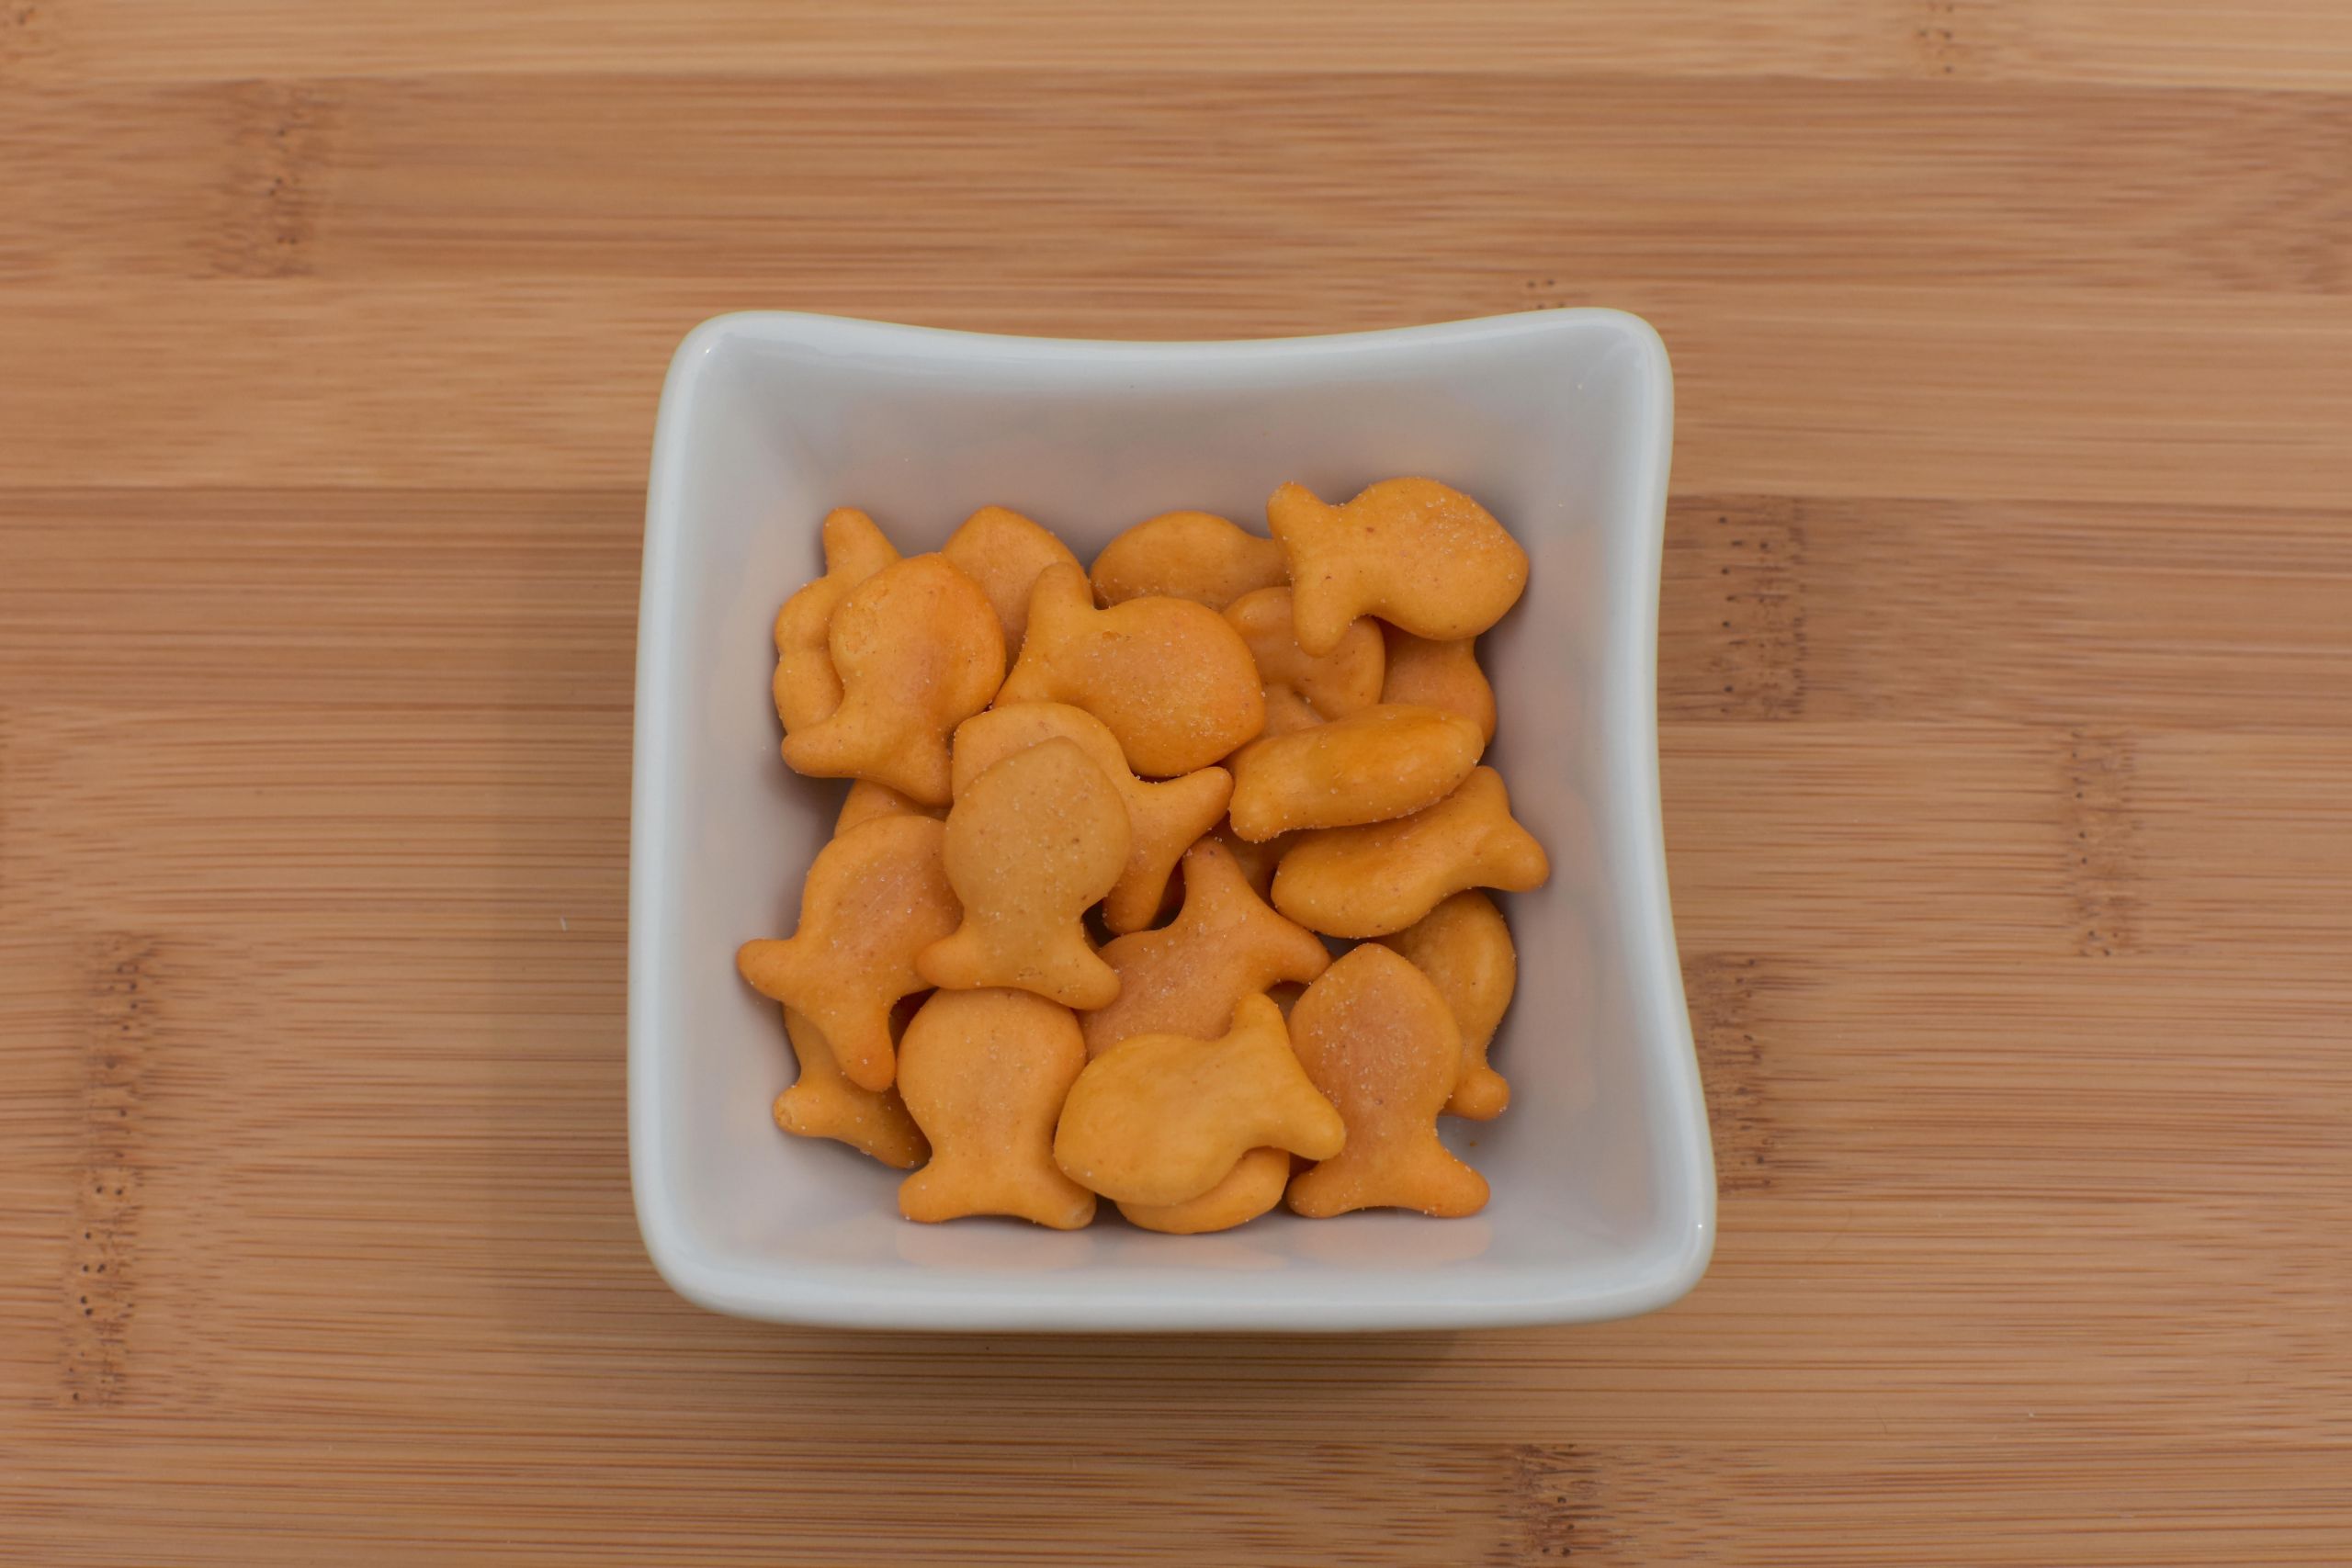 Recall On Goldfish Crackers Inspirational Goldfish Crackers Recalled by Pepperidge Farm Due to